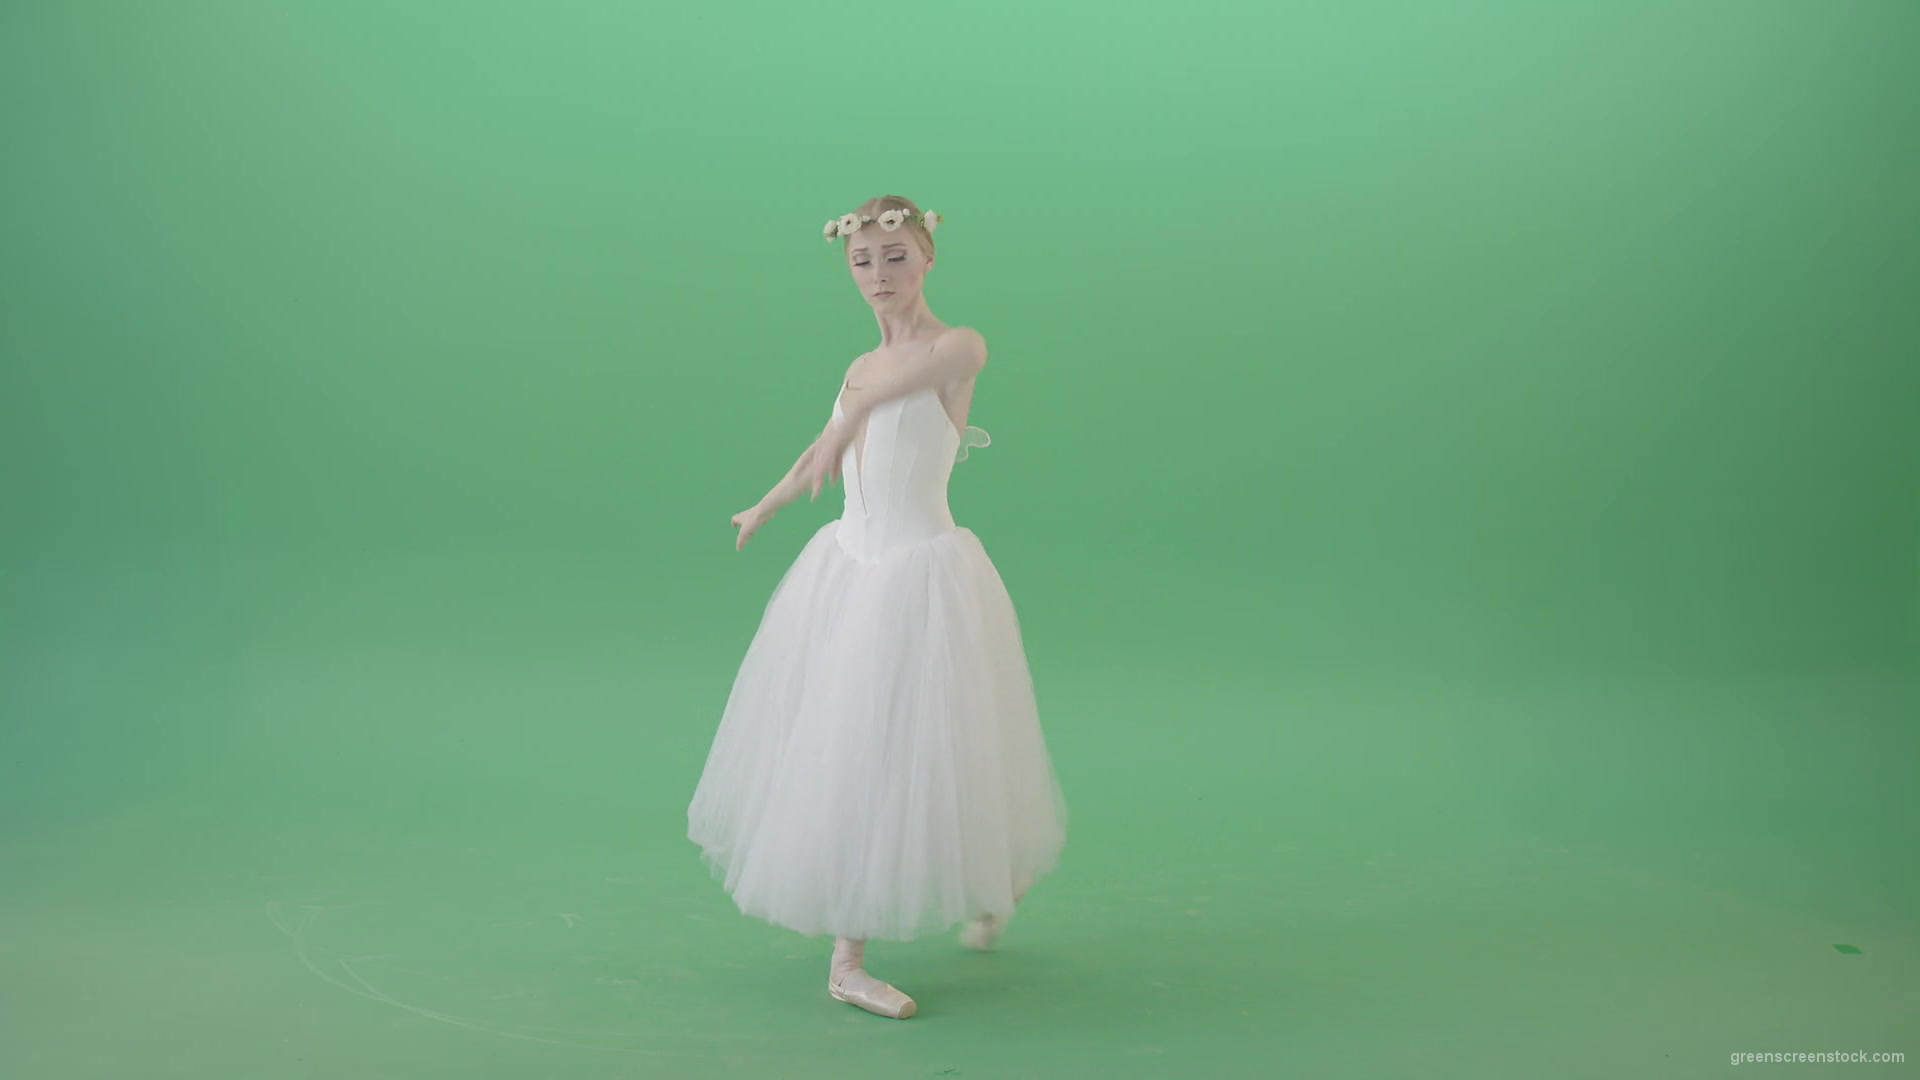 Sensuality-Choreographer-making-regards-in-white-dress-amazing-ballet-girl-isolated-on-green-screen-4K-Video-Footage-1920_006 Green Screen Stock